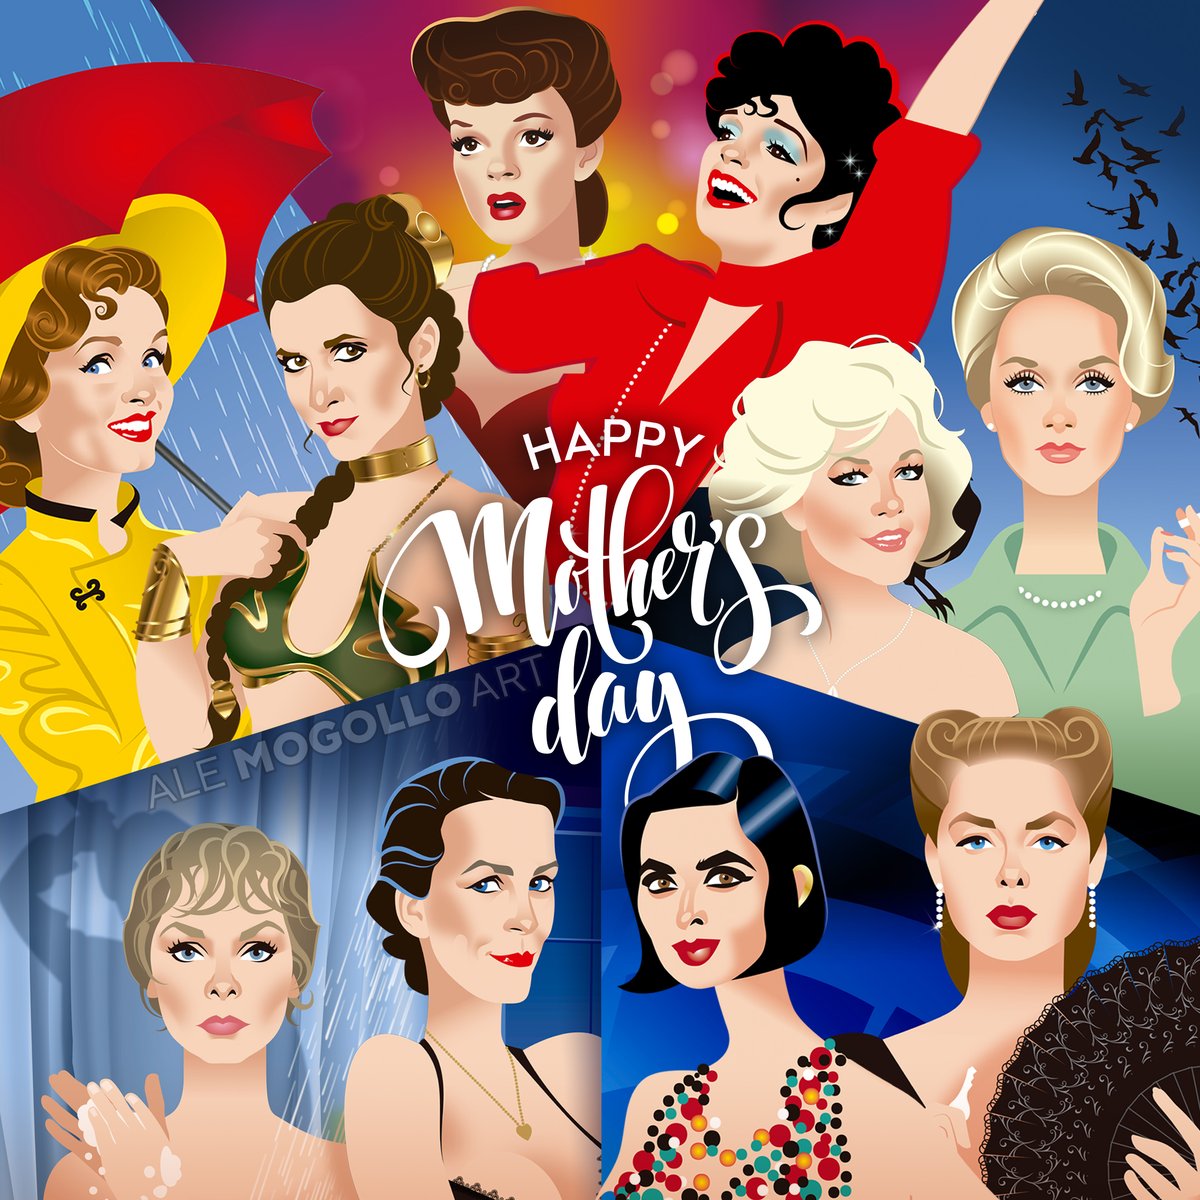 Happy Mother’s Day to all of you who celebrate today! ❤️ with these famous moms and daughters!
#debbiereynolds #carriefisher #isabellarossellini #ingridbergman #tippihedren #melaniegriffith #lizaminnelli #judygarland #janetleigh #jamieleecurtis #mothersday #HappyMothersDay2024